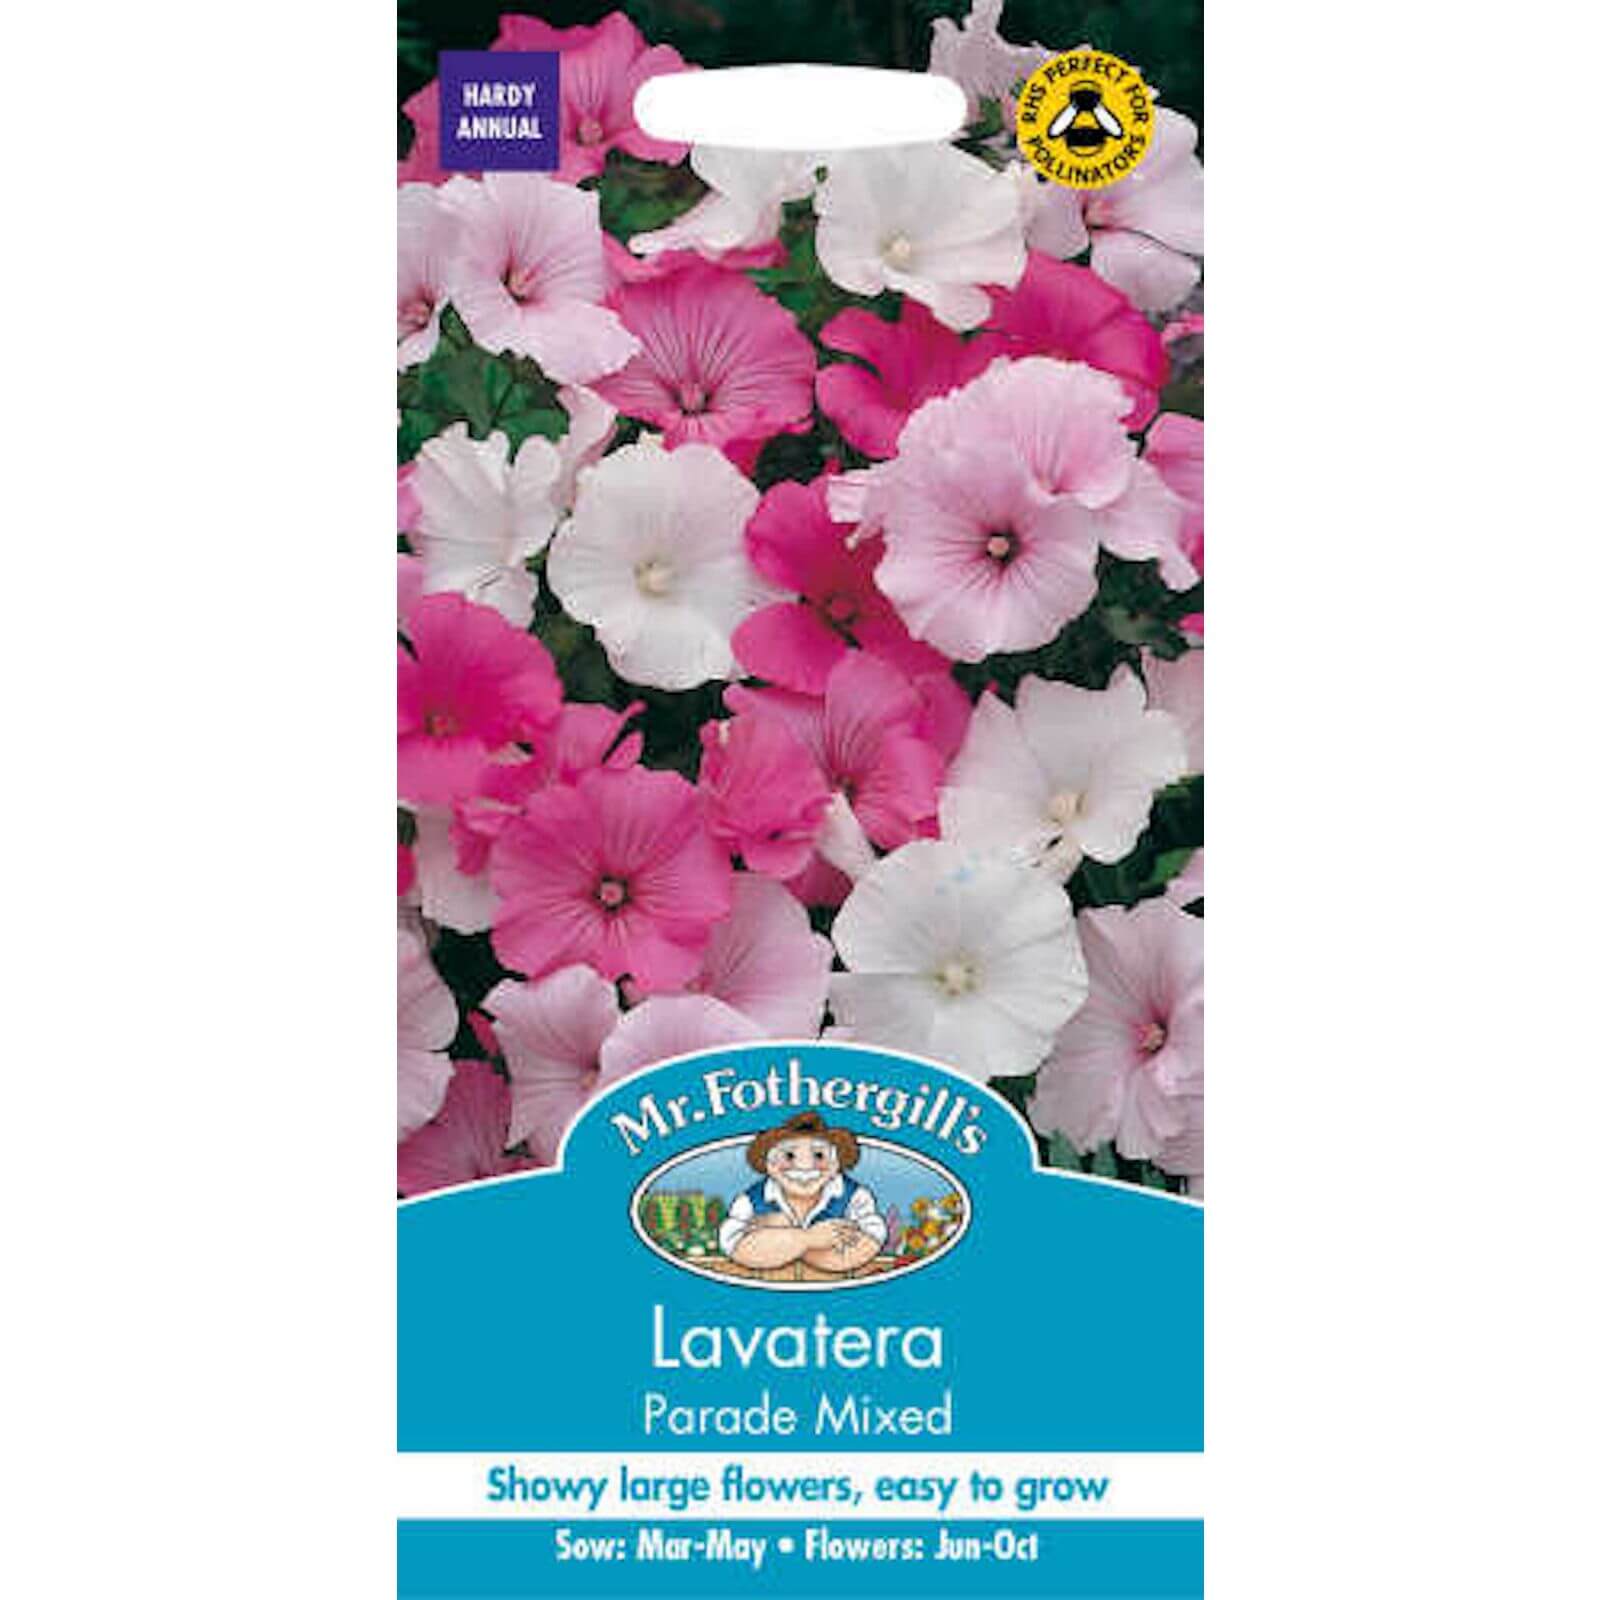 Mr. Fothergill's Lavatera Parade Mixed Seeds